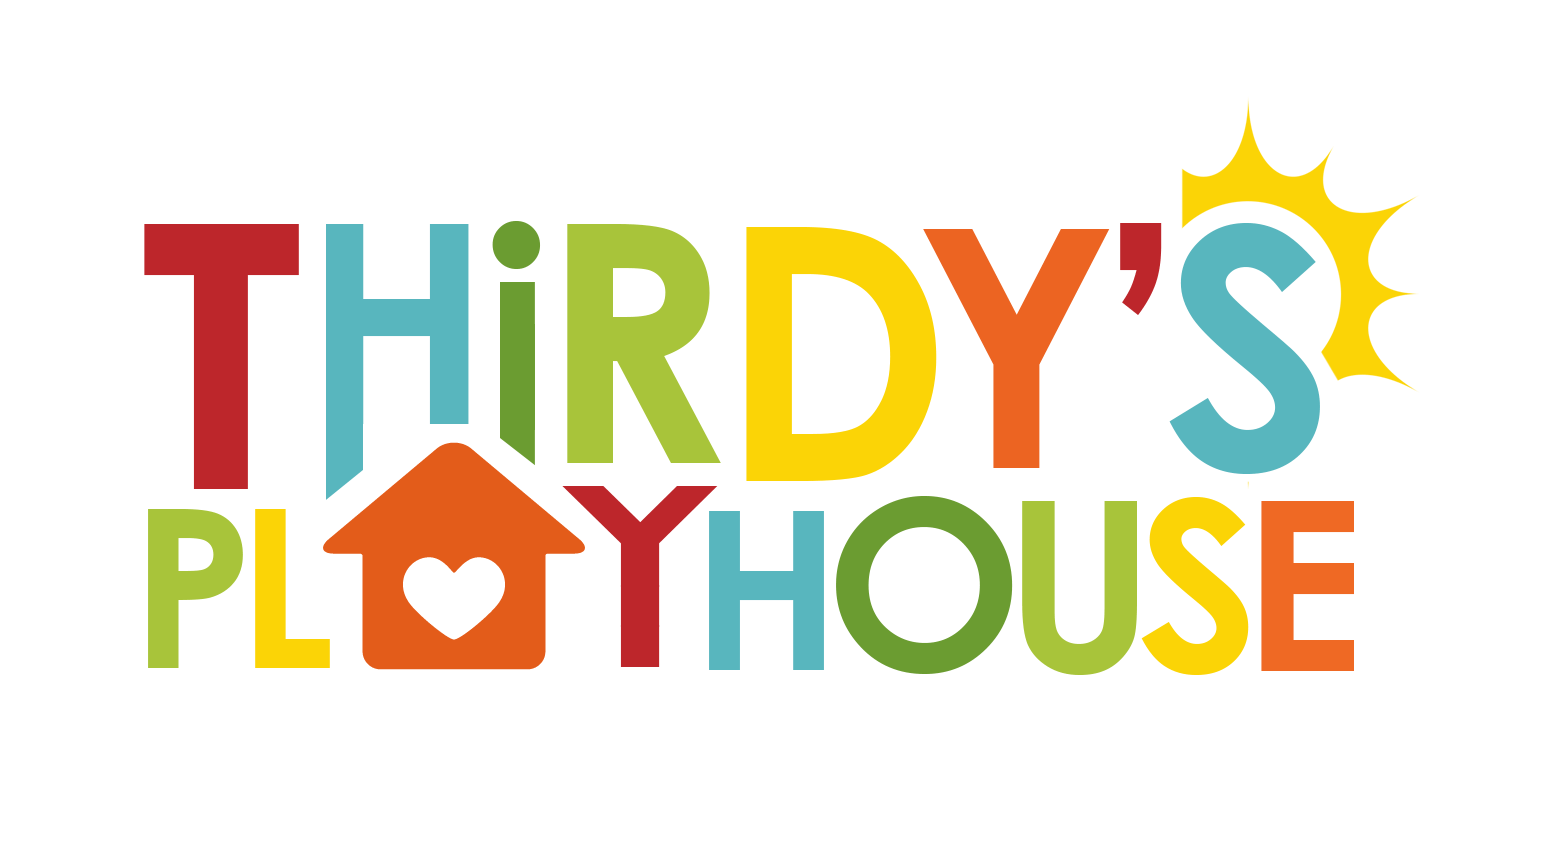 Thirdy's Playhouse